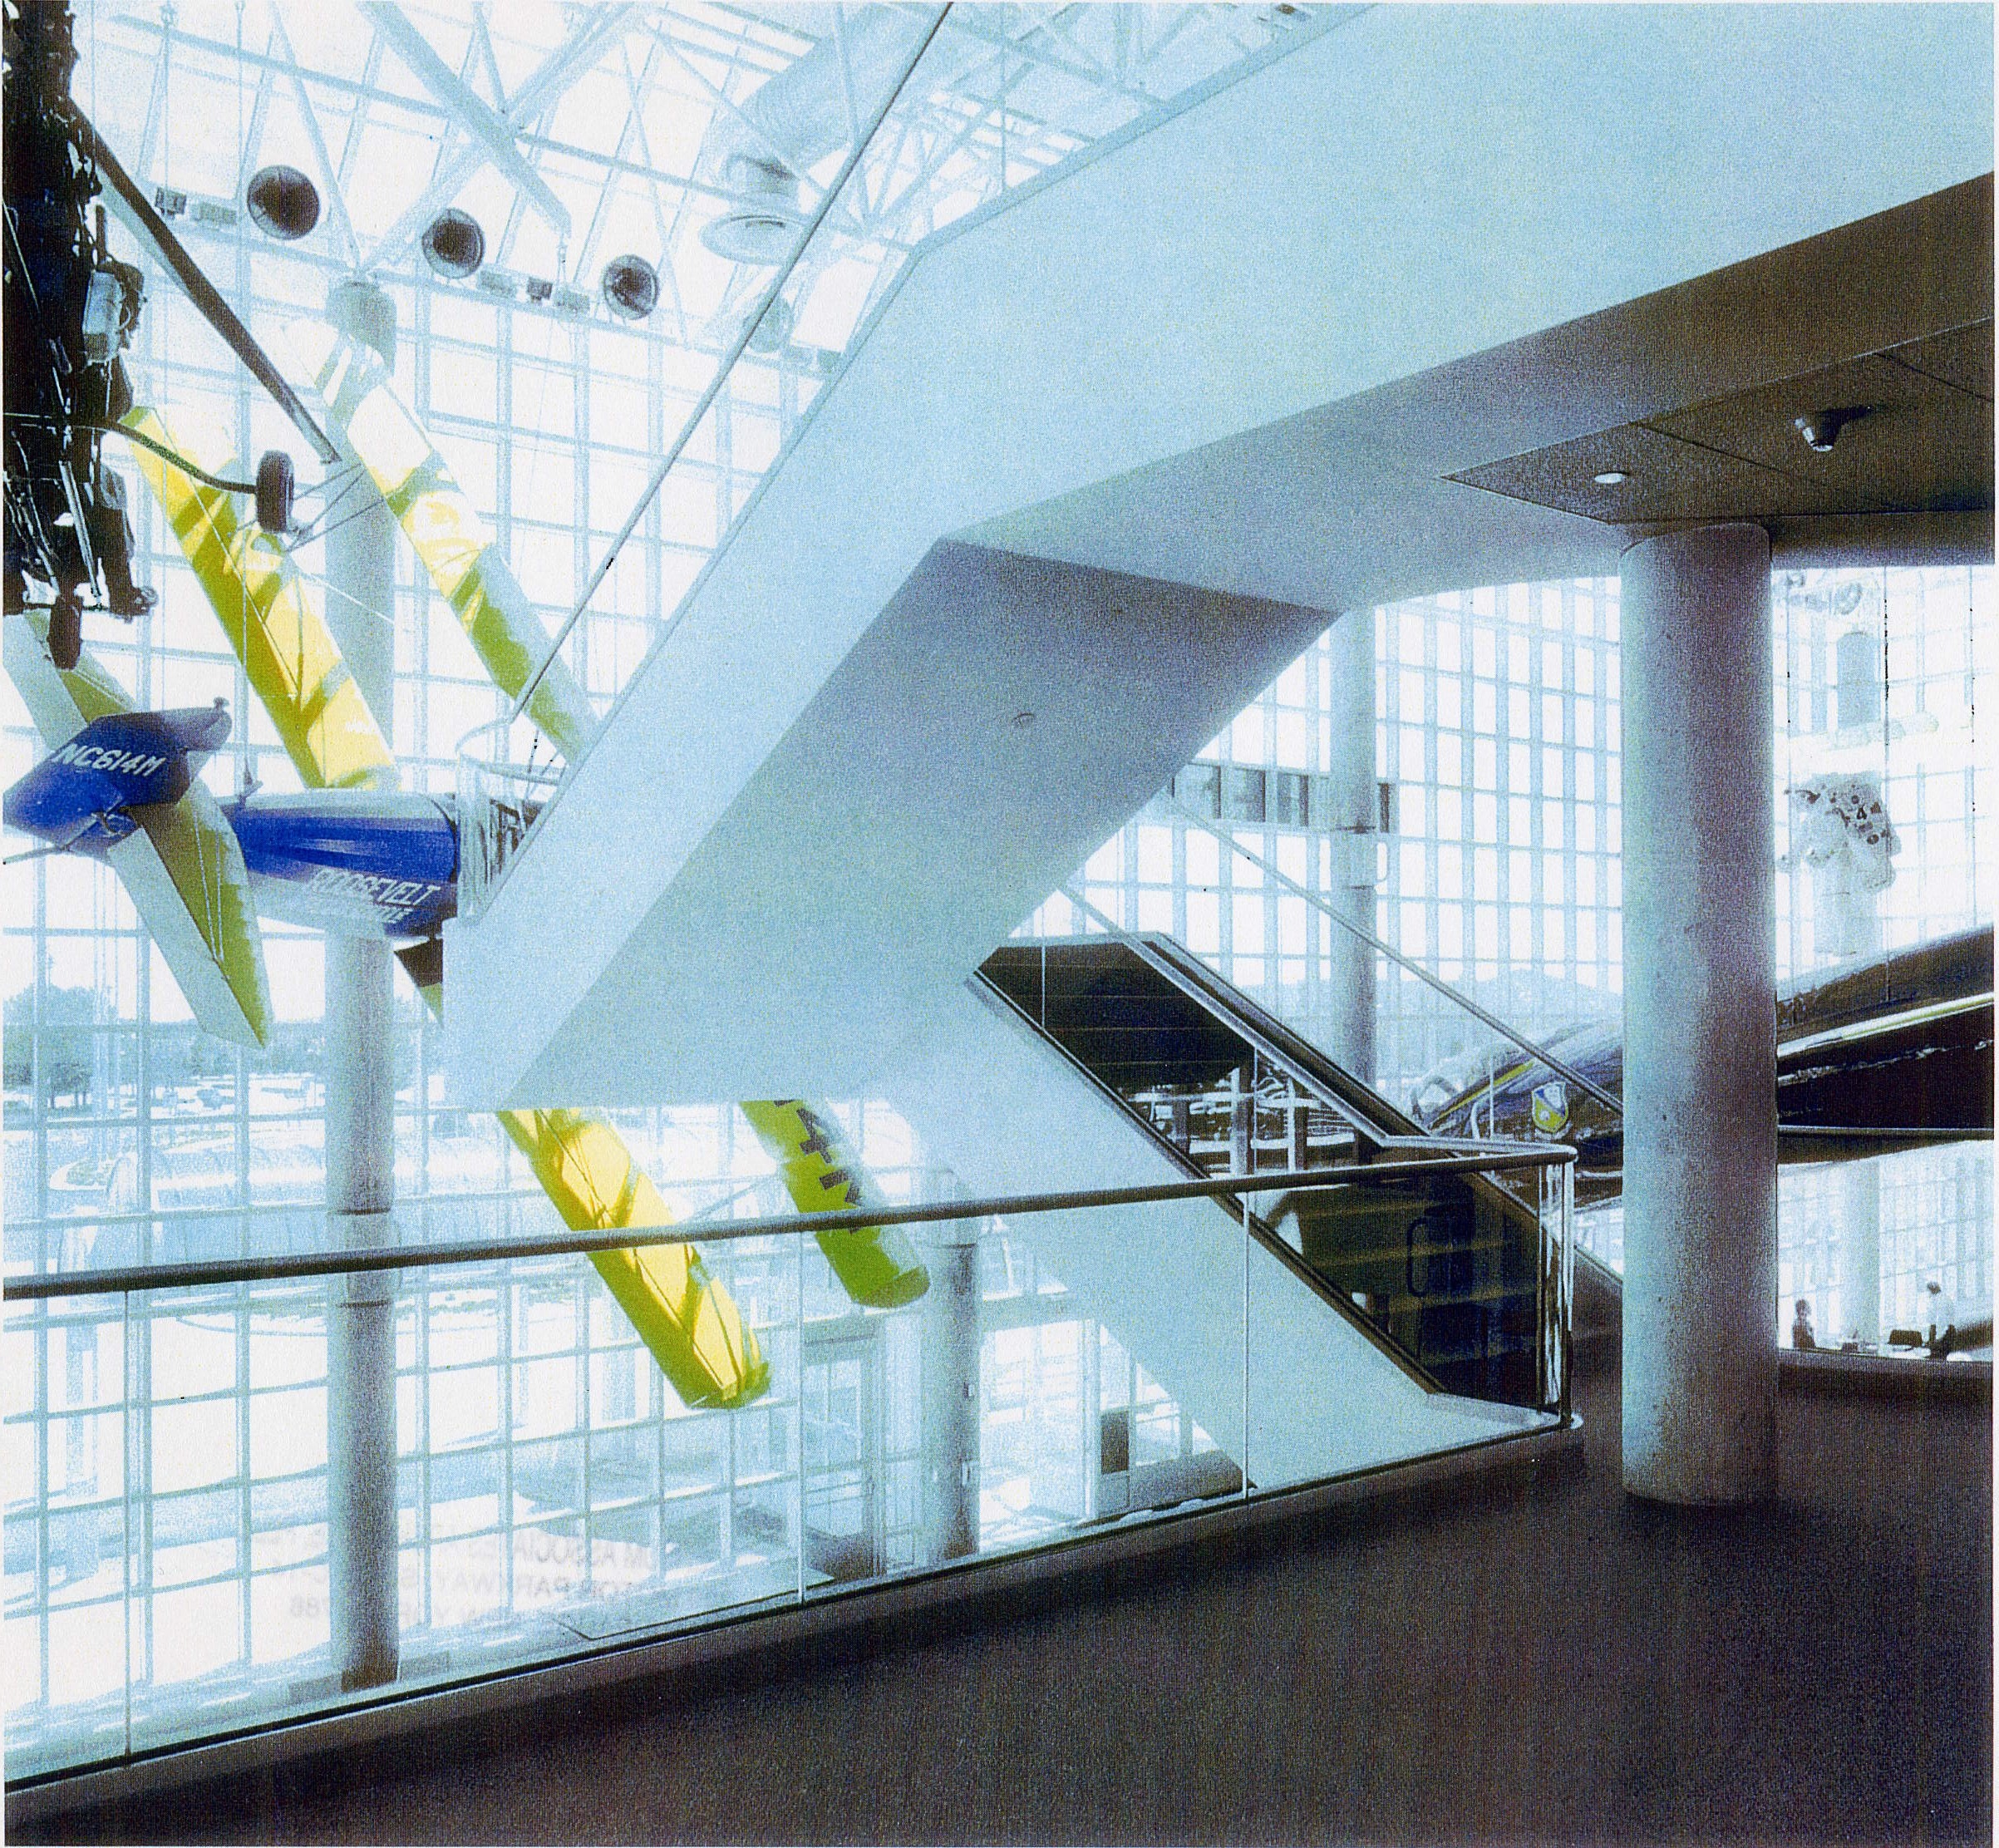 Cradle of Aviation Staircase